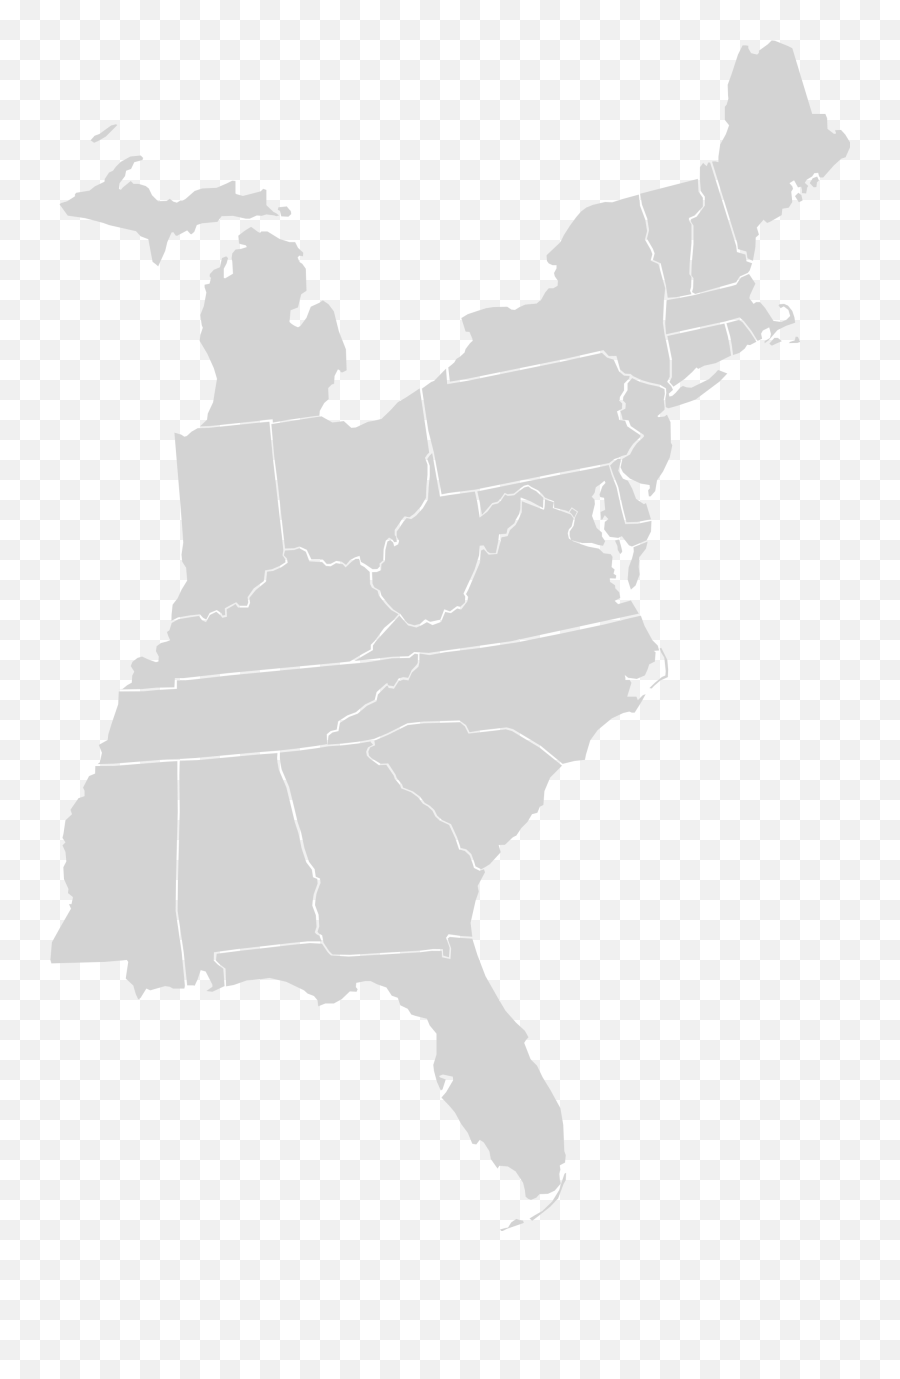 Eastern United States Png U0026 Free Eastern United Statespng - States With Stand Your Ground Laws Emoji,United States Png